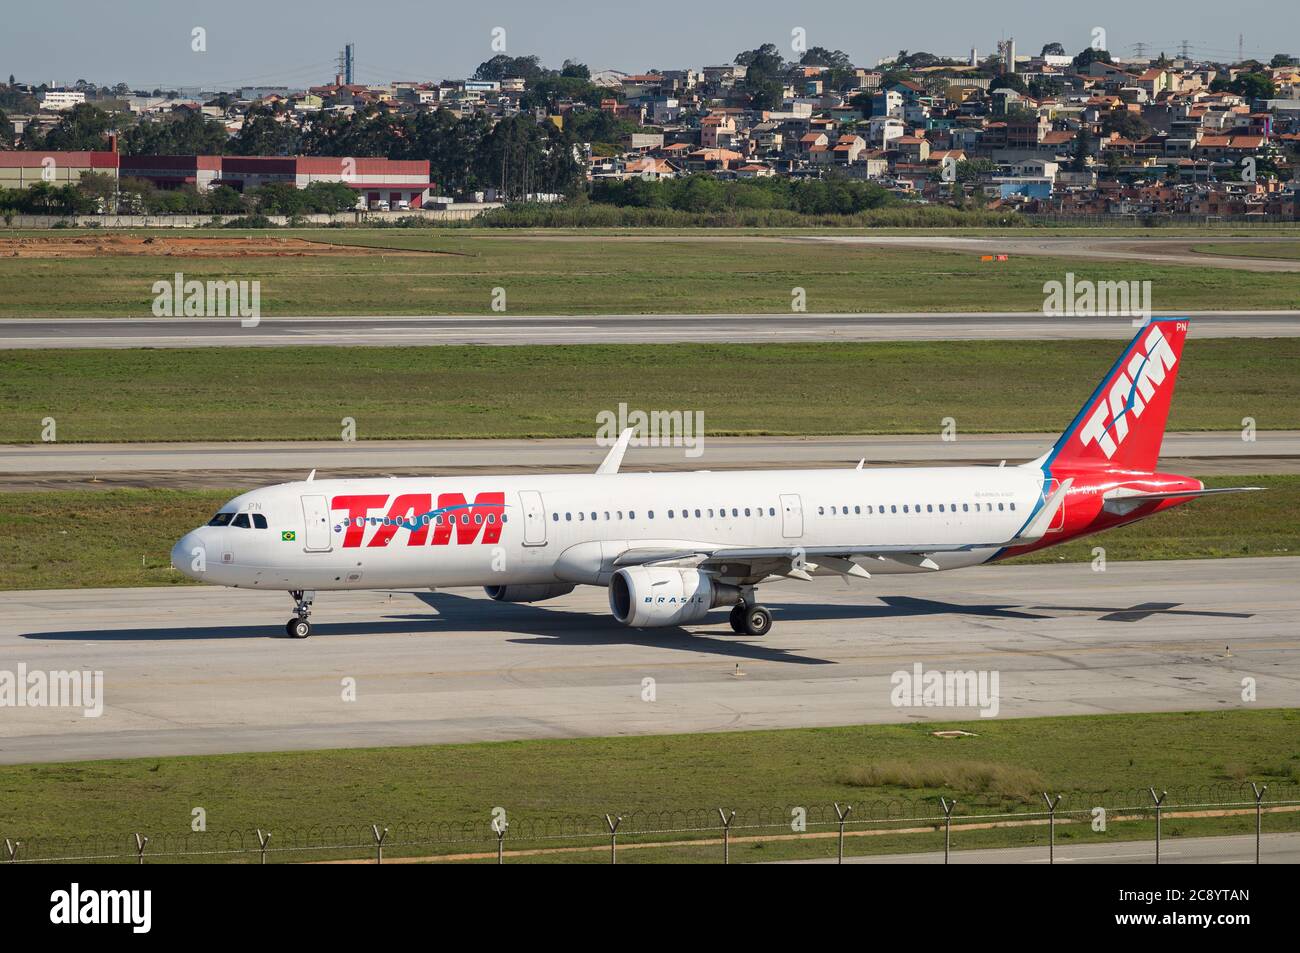 TAM Airlines Airbus A321-211 (Narrow-body jetliner - Reg. PT-XPN) taxing heading runway 27R in Sao Paulo/Guarulhos Intl. Airport. Stock Photo